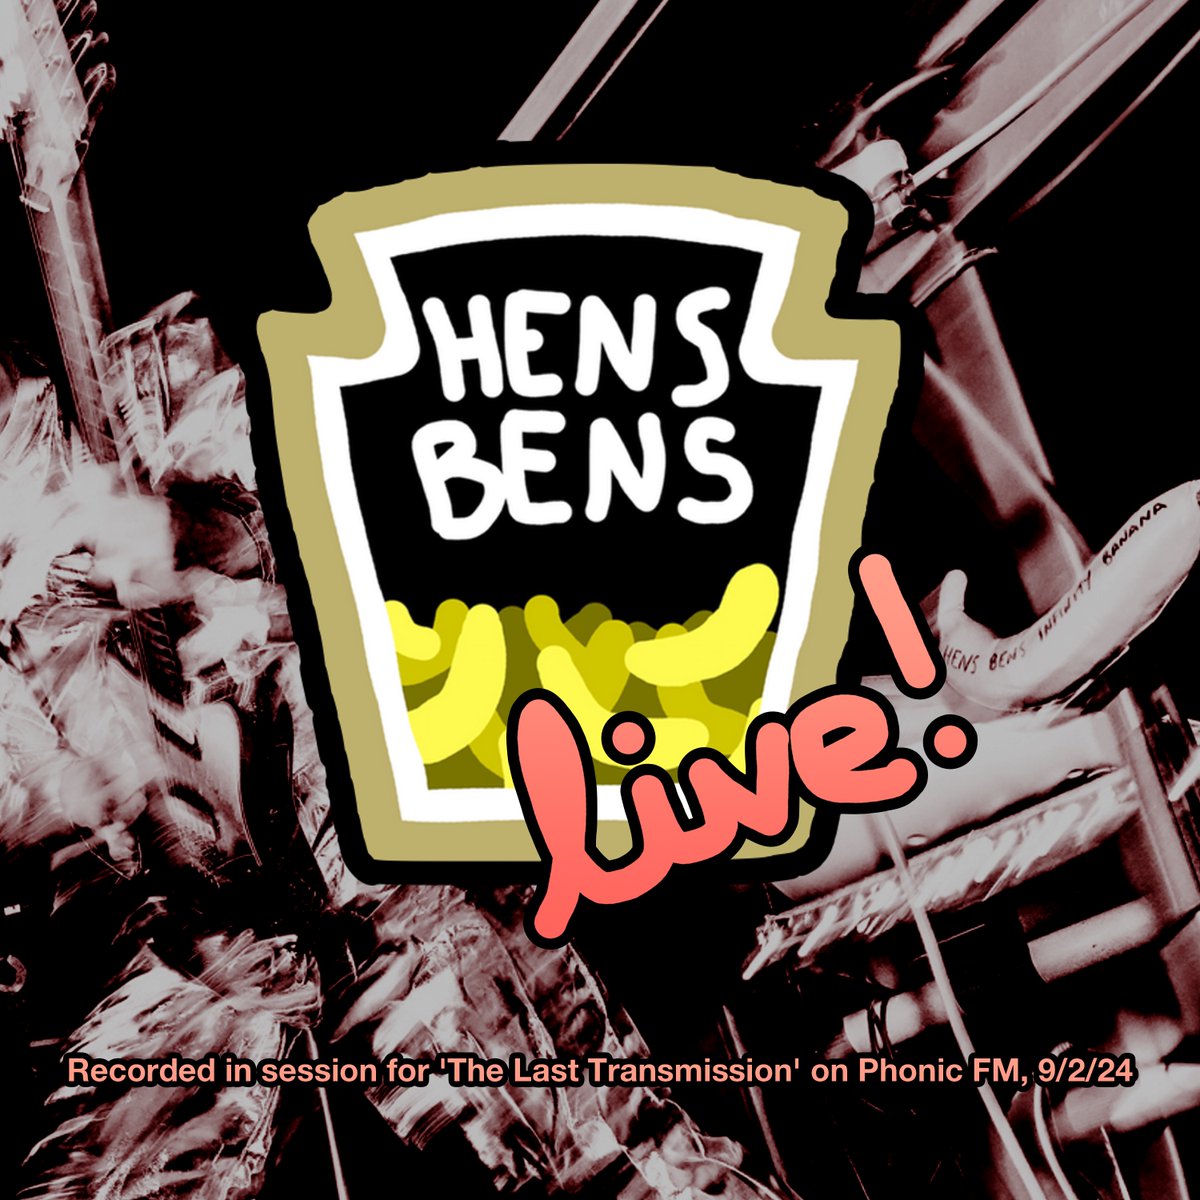 NEW ON BANDCAMP: HENS BENS LIVE! A special live EP featuring four songs recorded in session earlier this year for 'The Last Transmission' on @phonicfm. This is the first of several special surprises we hope to release over the next few months... hensbens.bandcamp.com/album/hens-ben…